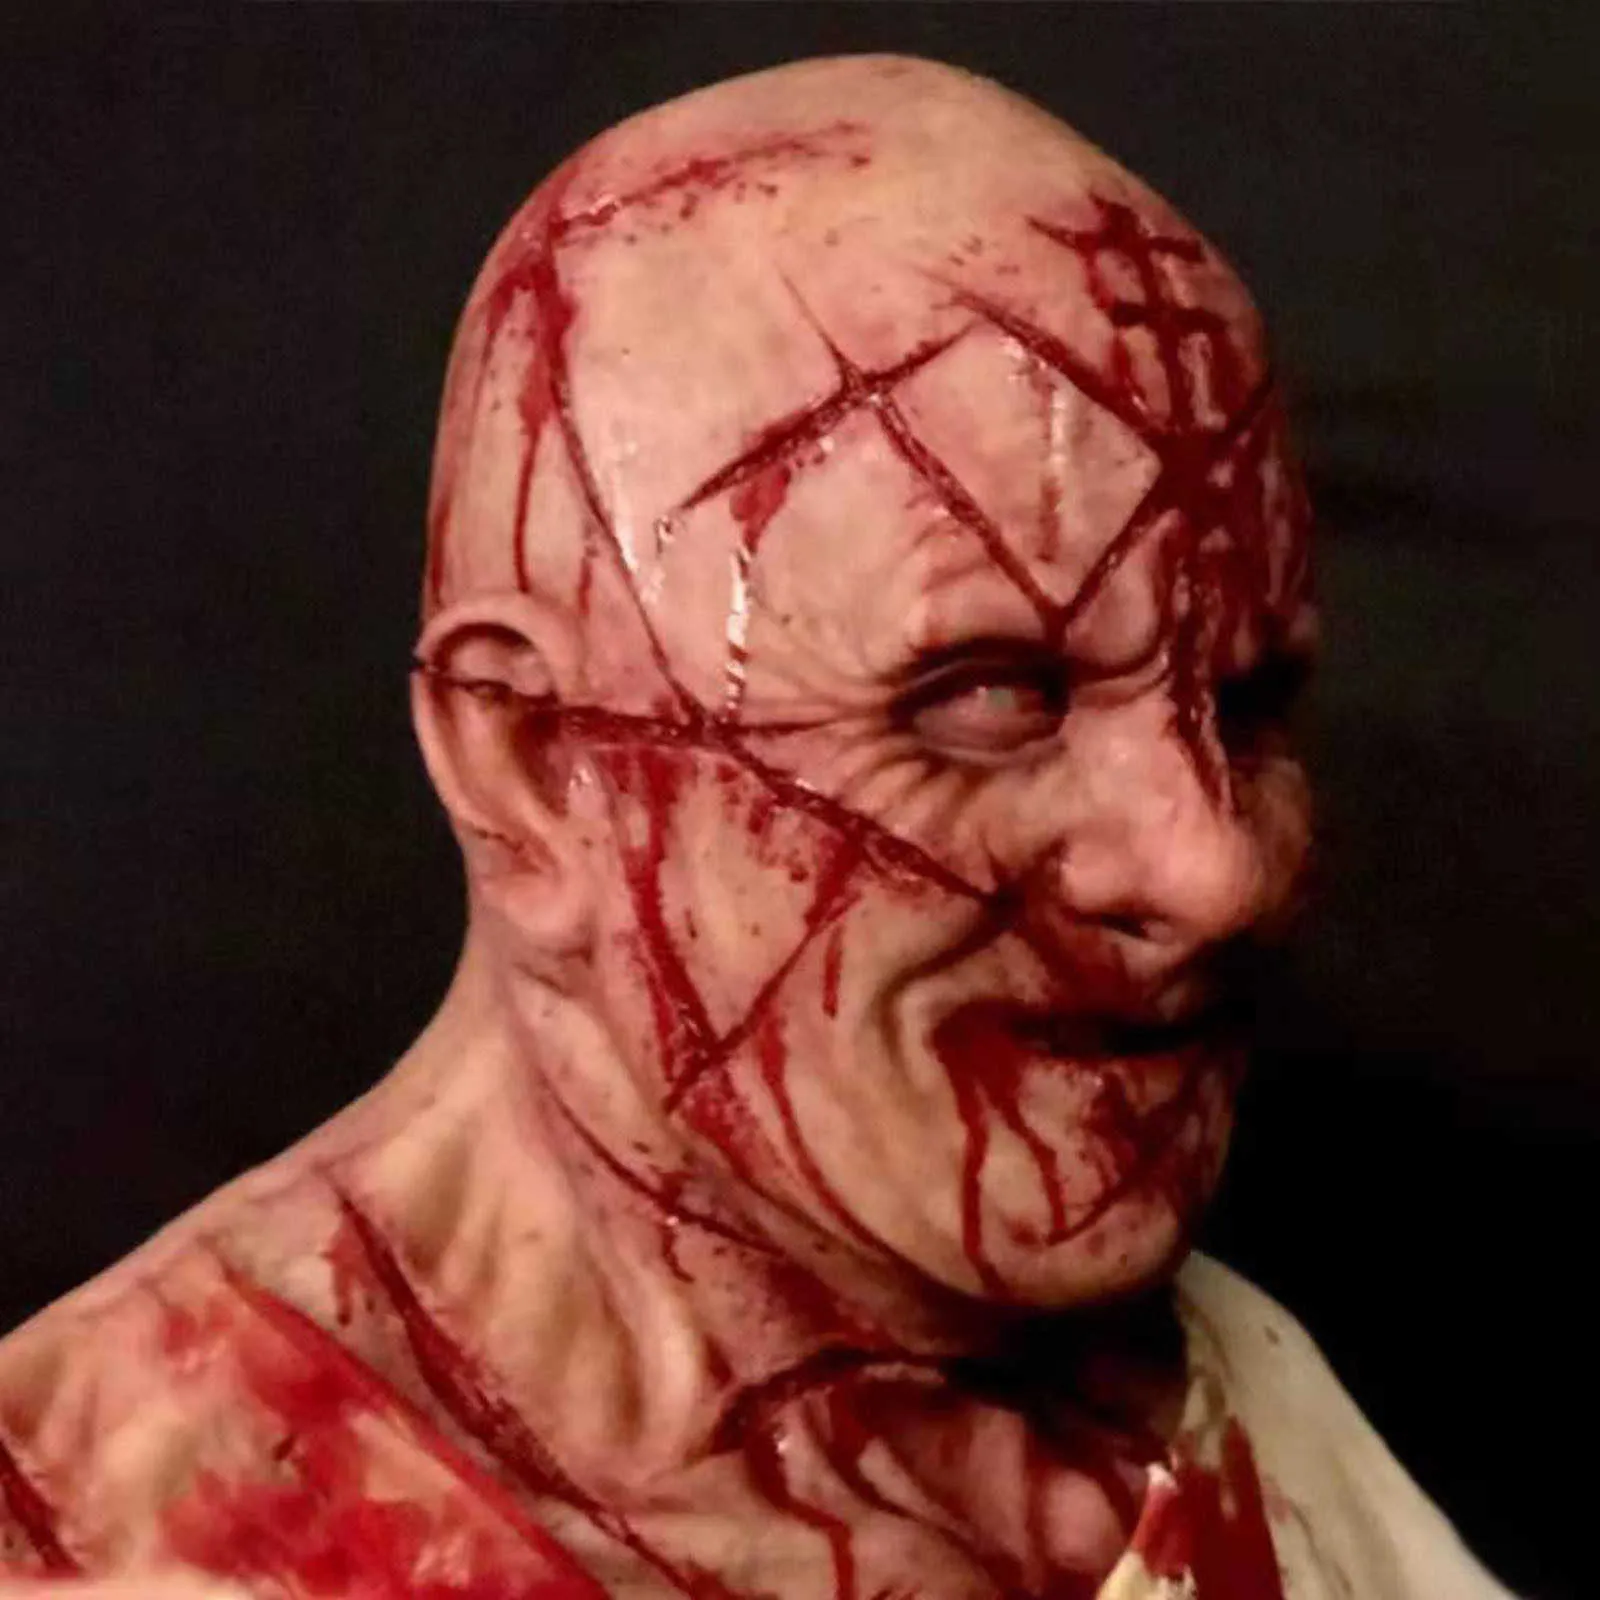 Scary Bald Blood Scar Mask Horror Bloody Headgear 3d Realistic Human Face Headgear emulsion latex adults Mask breathable masque Q0275M